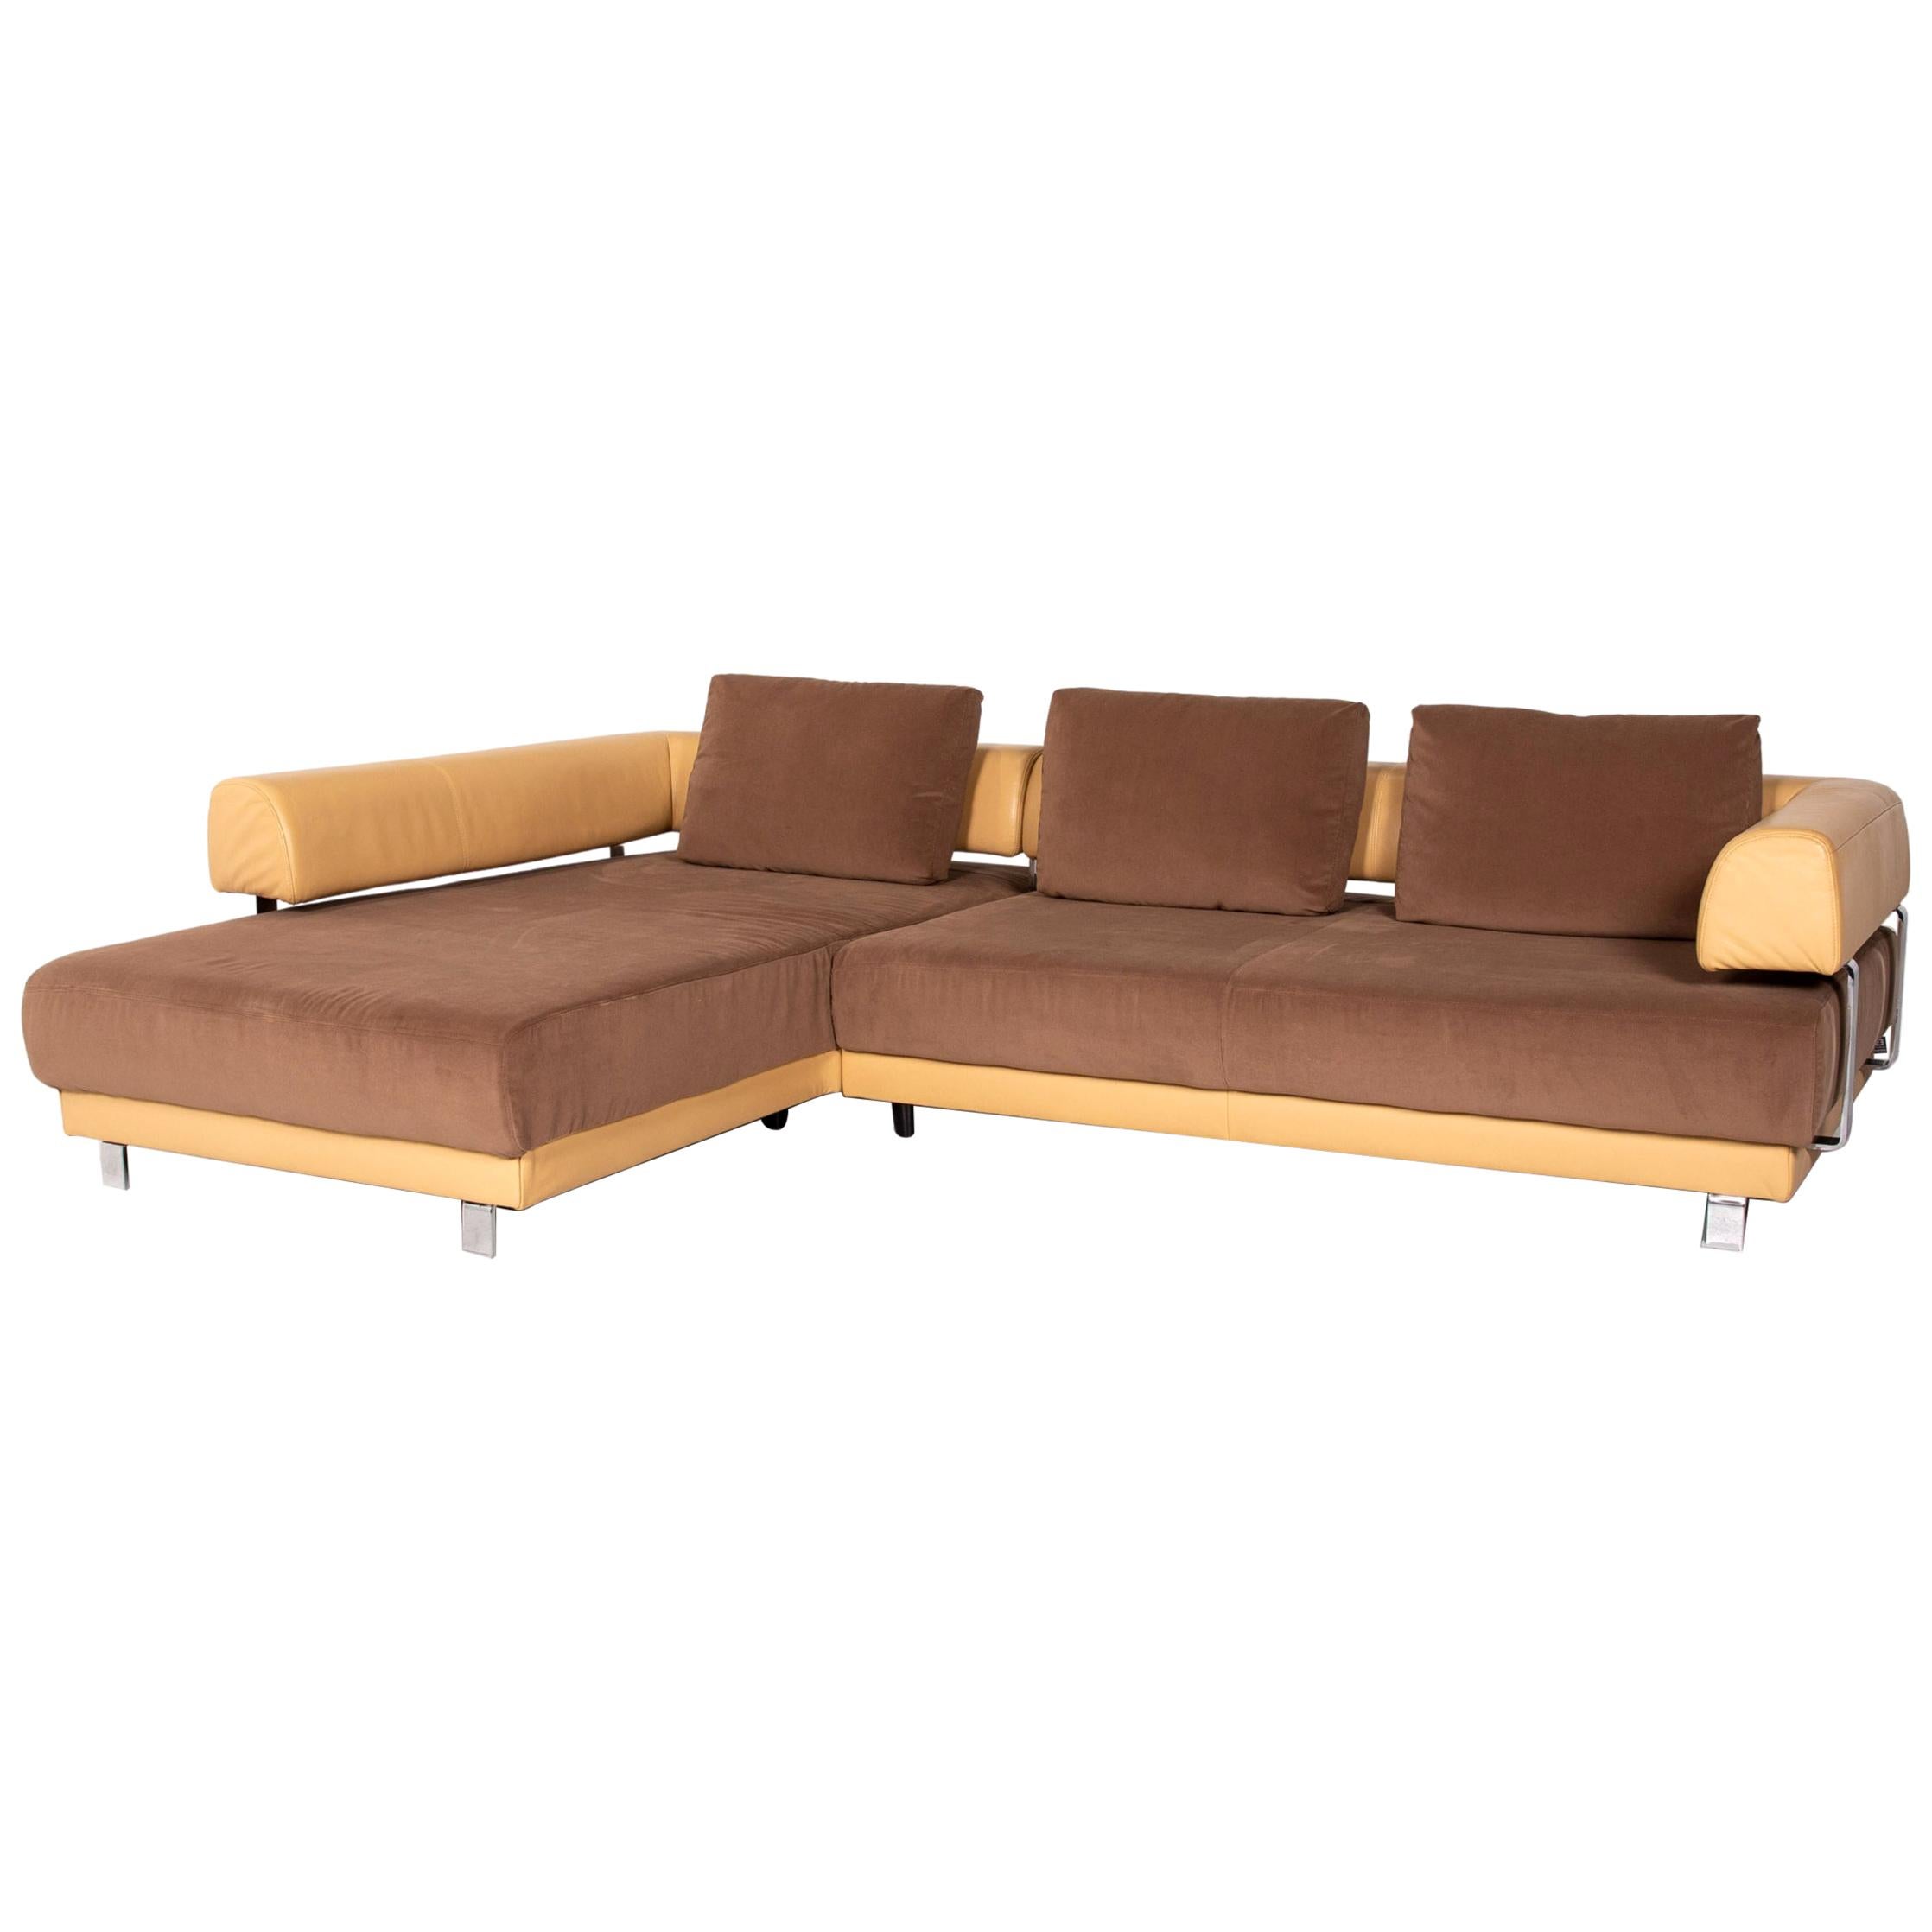 Ewald Schillig Brand Face Electric Function Leather Fabric Corner Sofa Beige For Sale